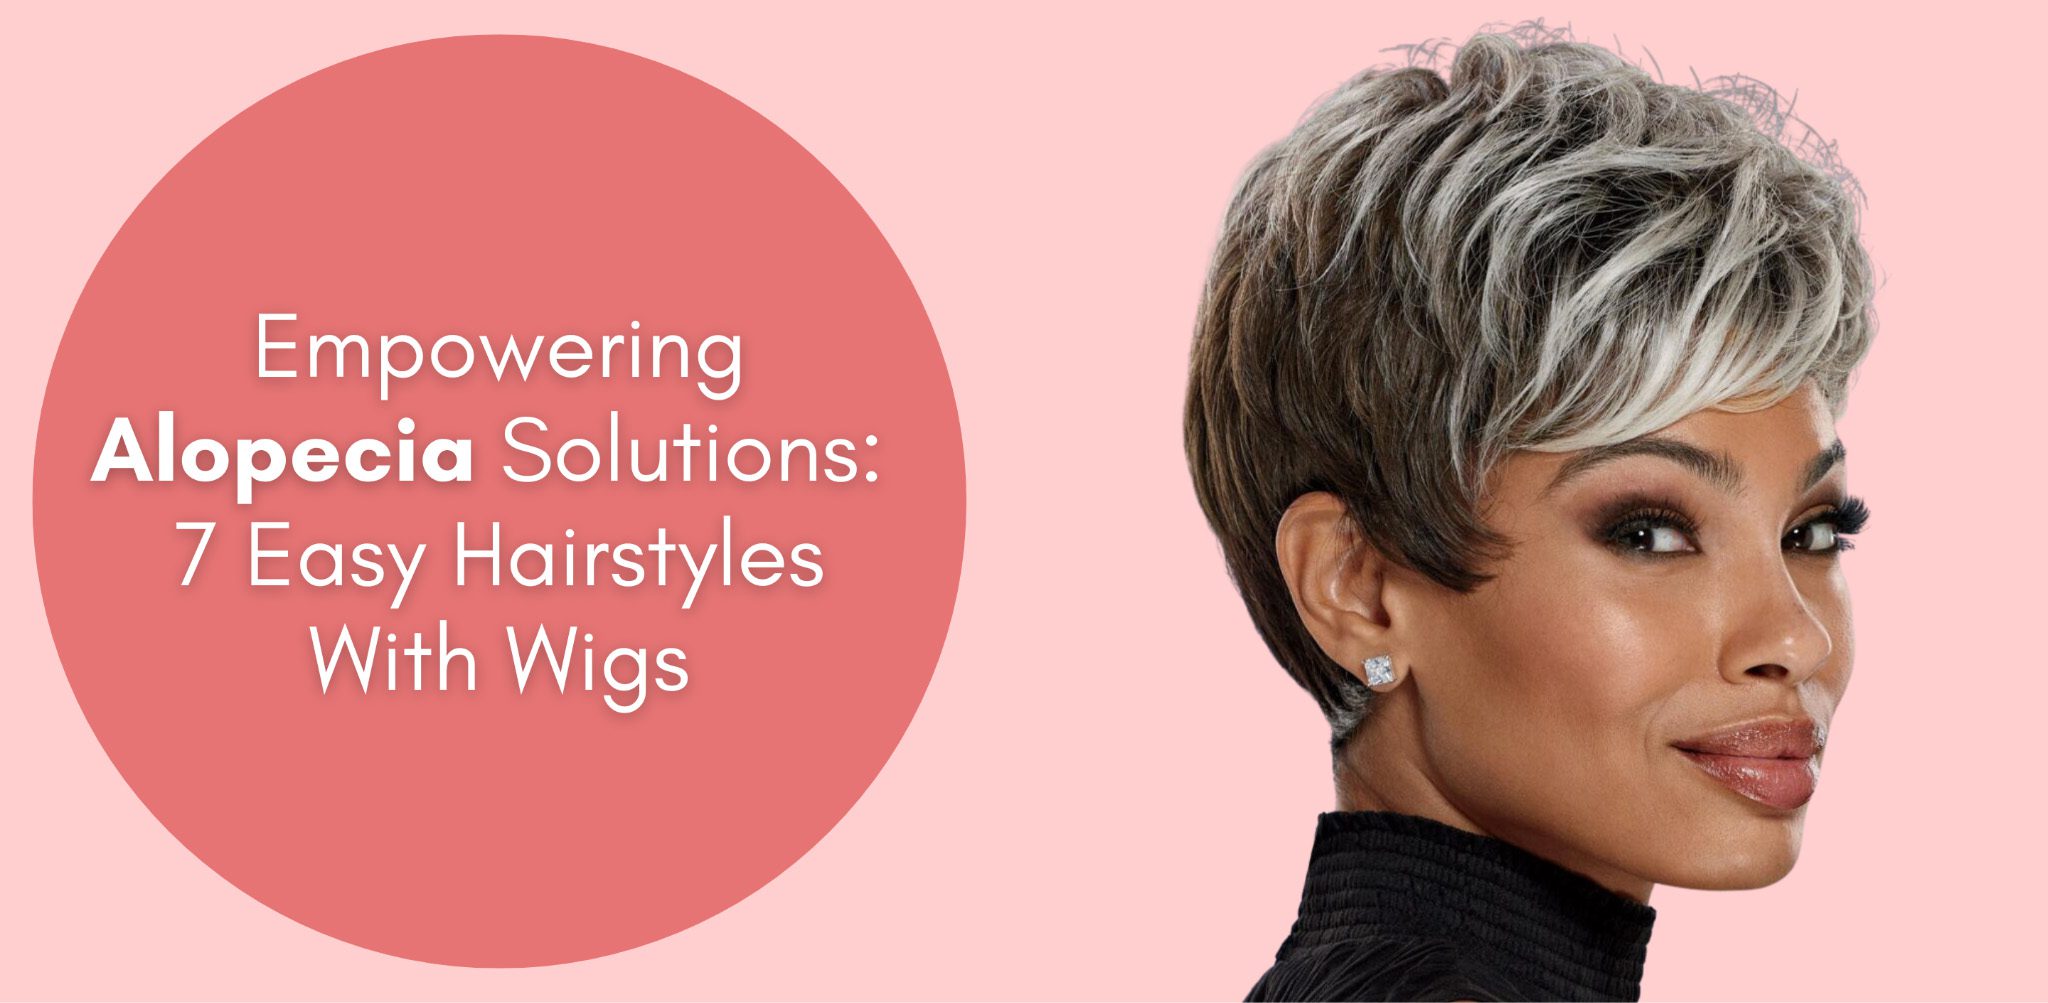 Empowering Alopecia Solutions: 7 Easy Hairstyles With Wigs